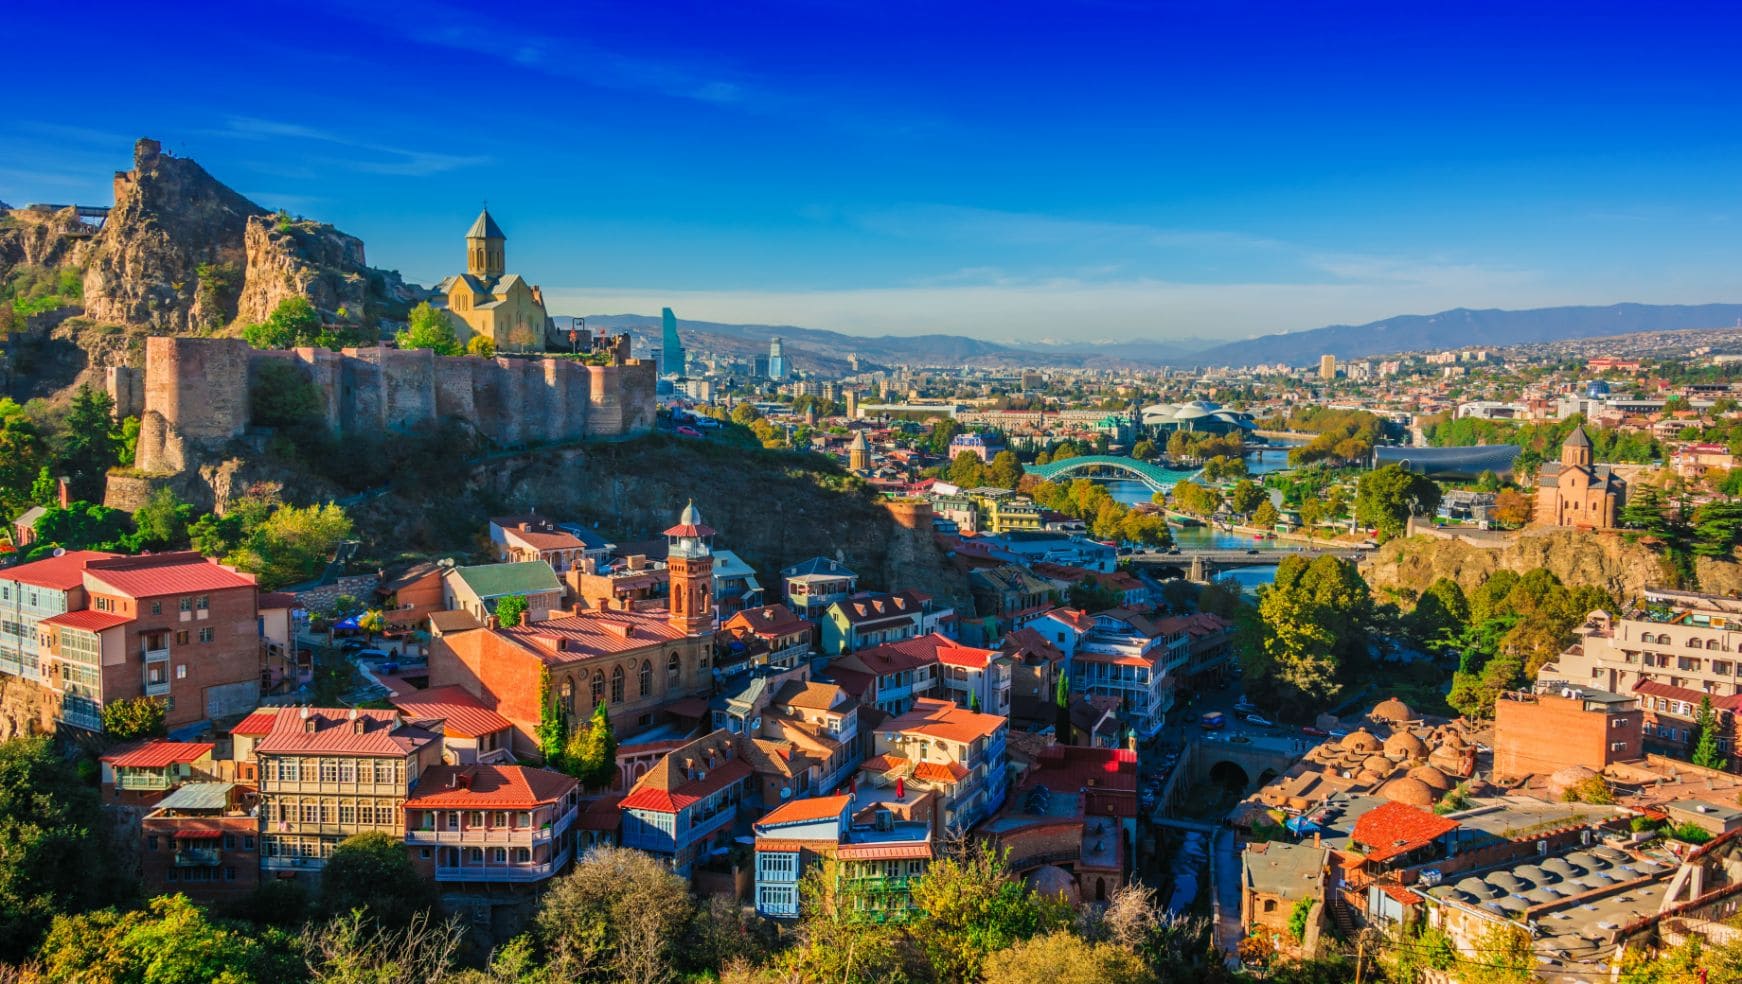 DAY 1: WELCOME TO TBILISI – START YOUR GEORGIAN ODYSSEY WITH A CITY TOUR